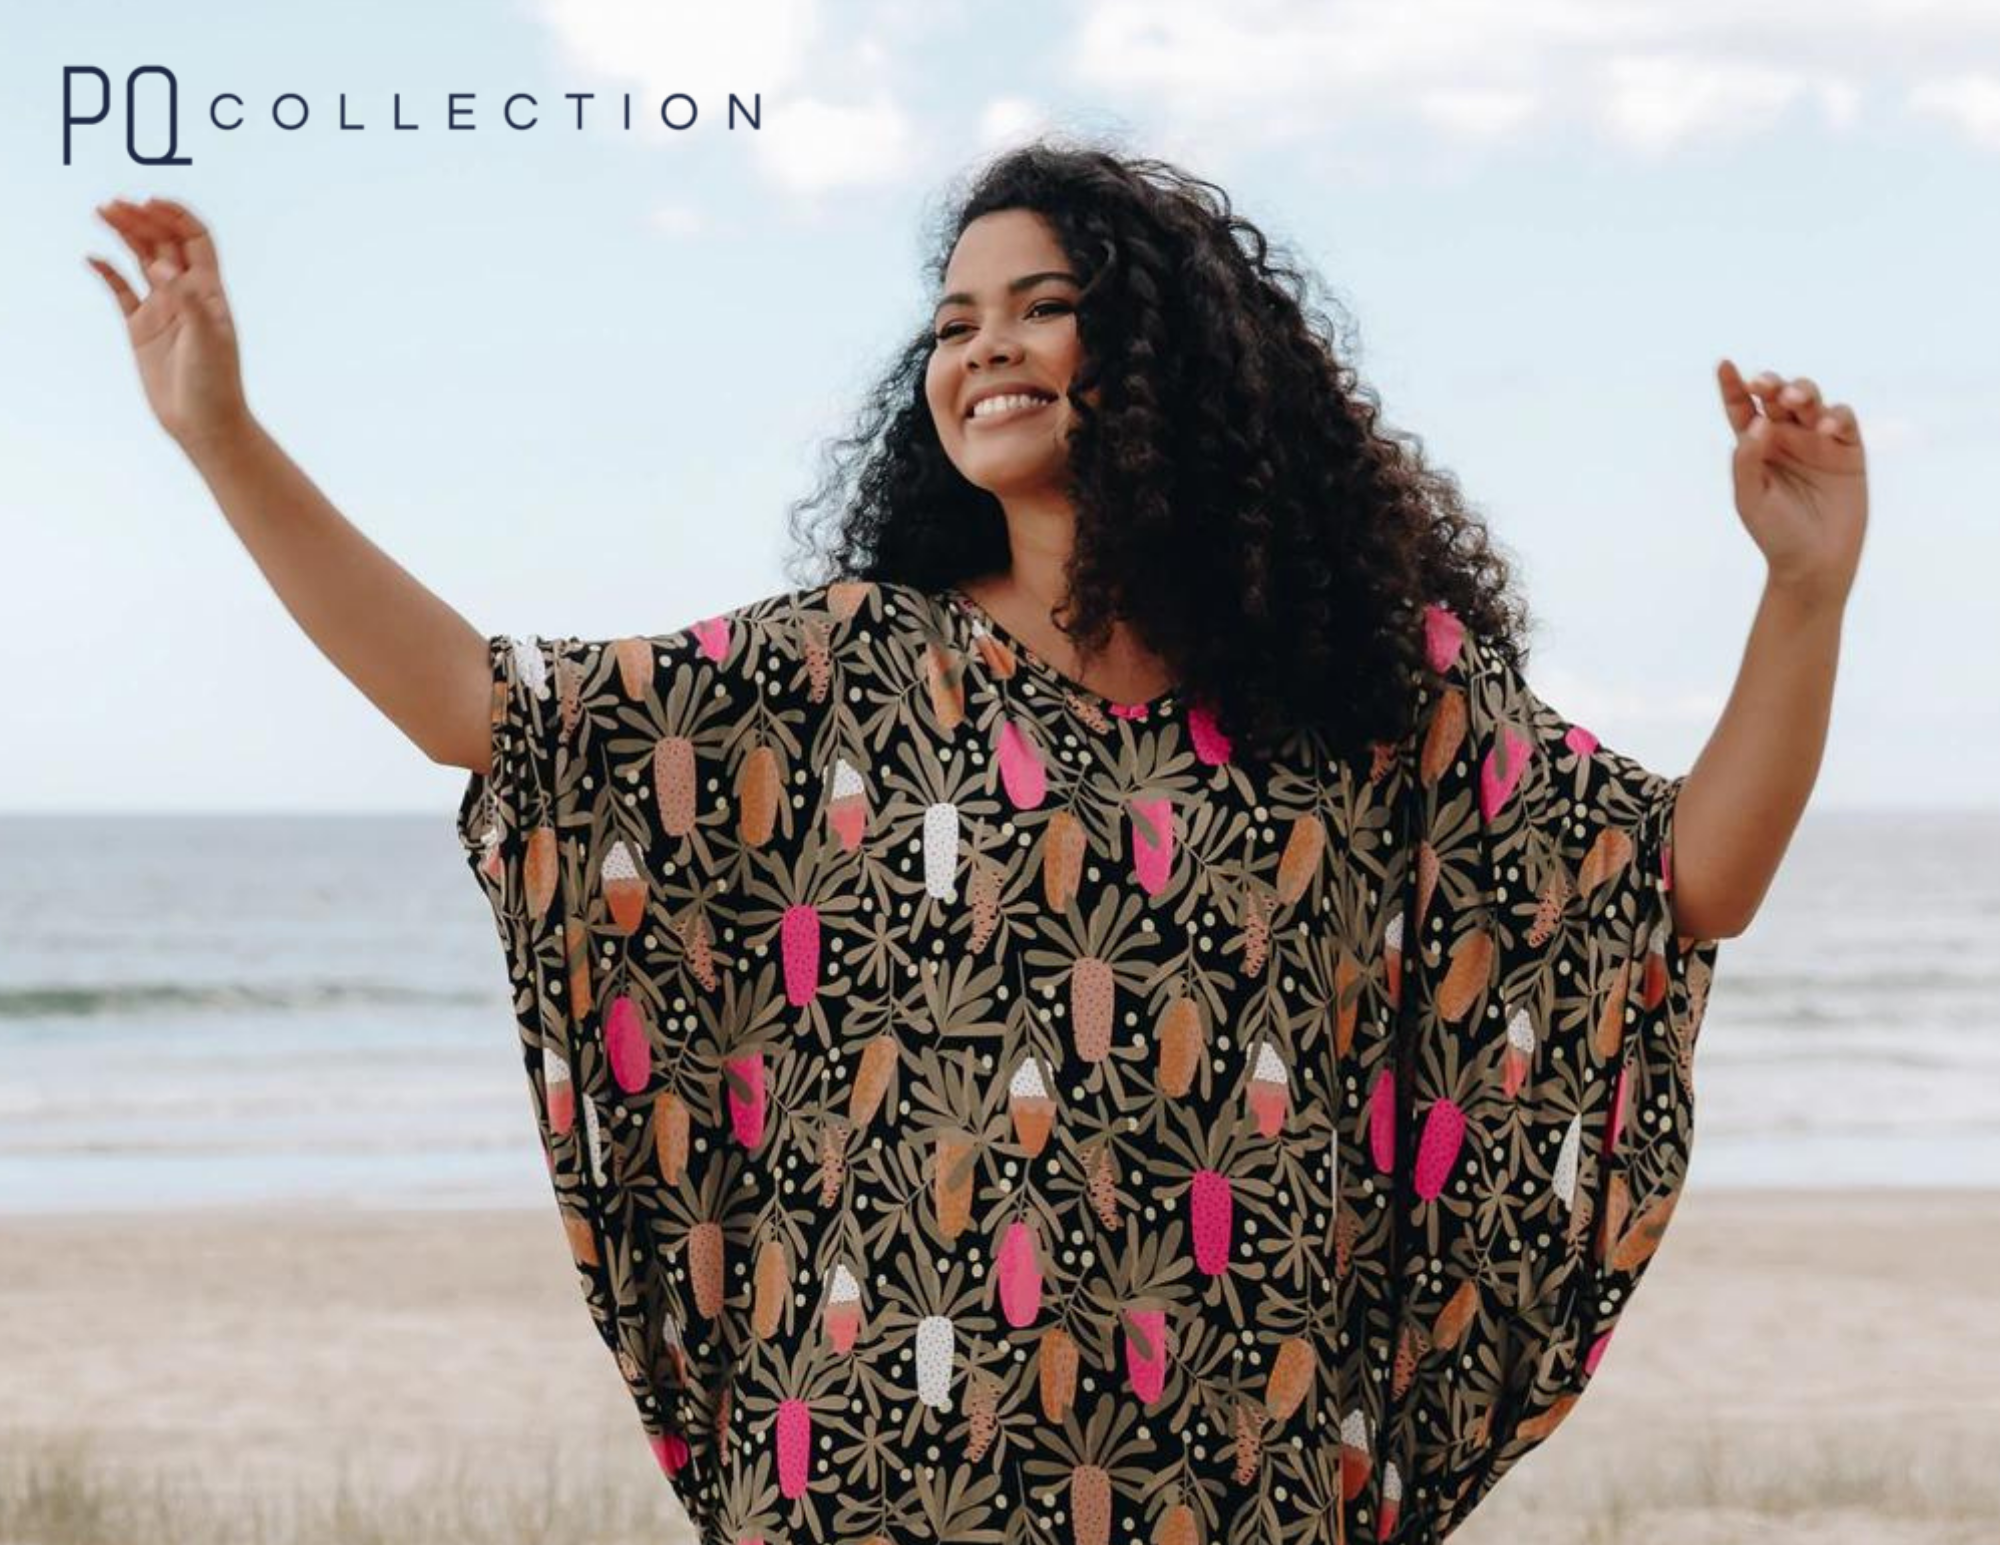 Fun & Whimsical Bamboo Clothing That Will Brighten Anyone's Day